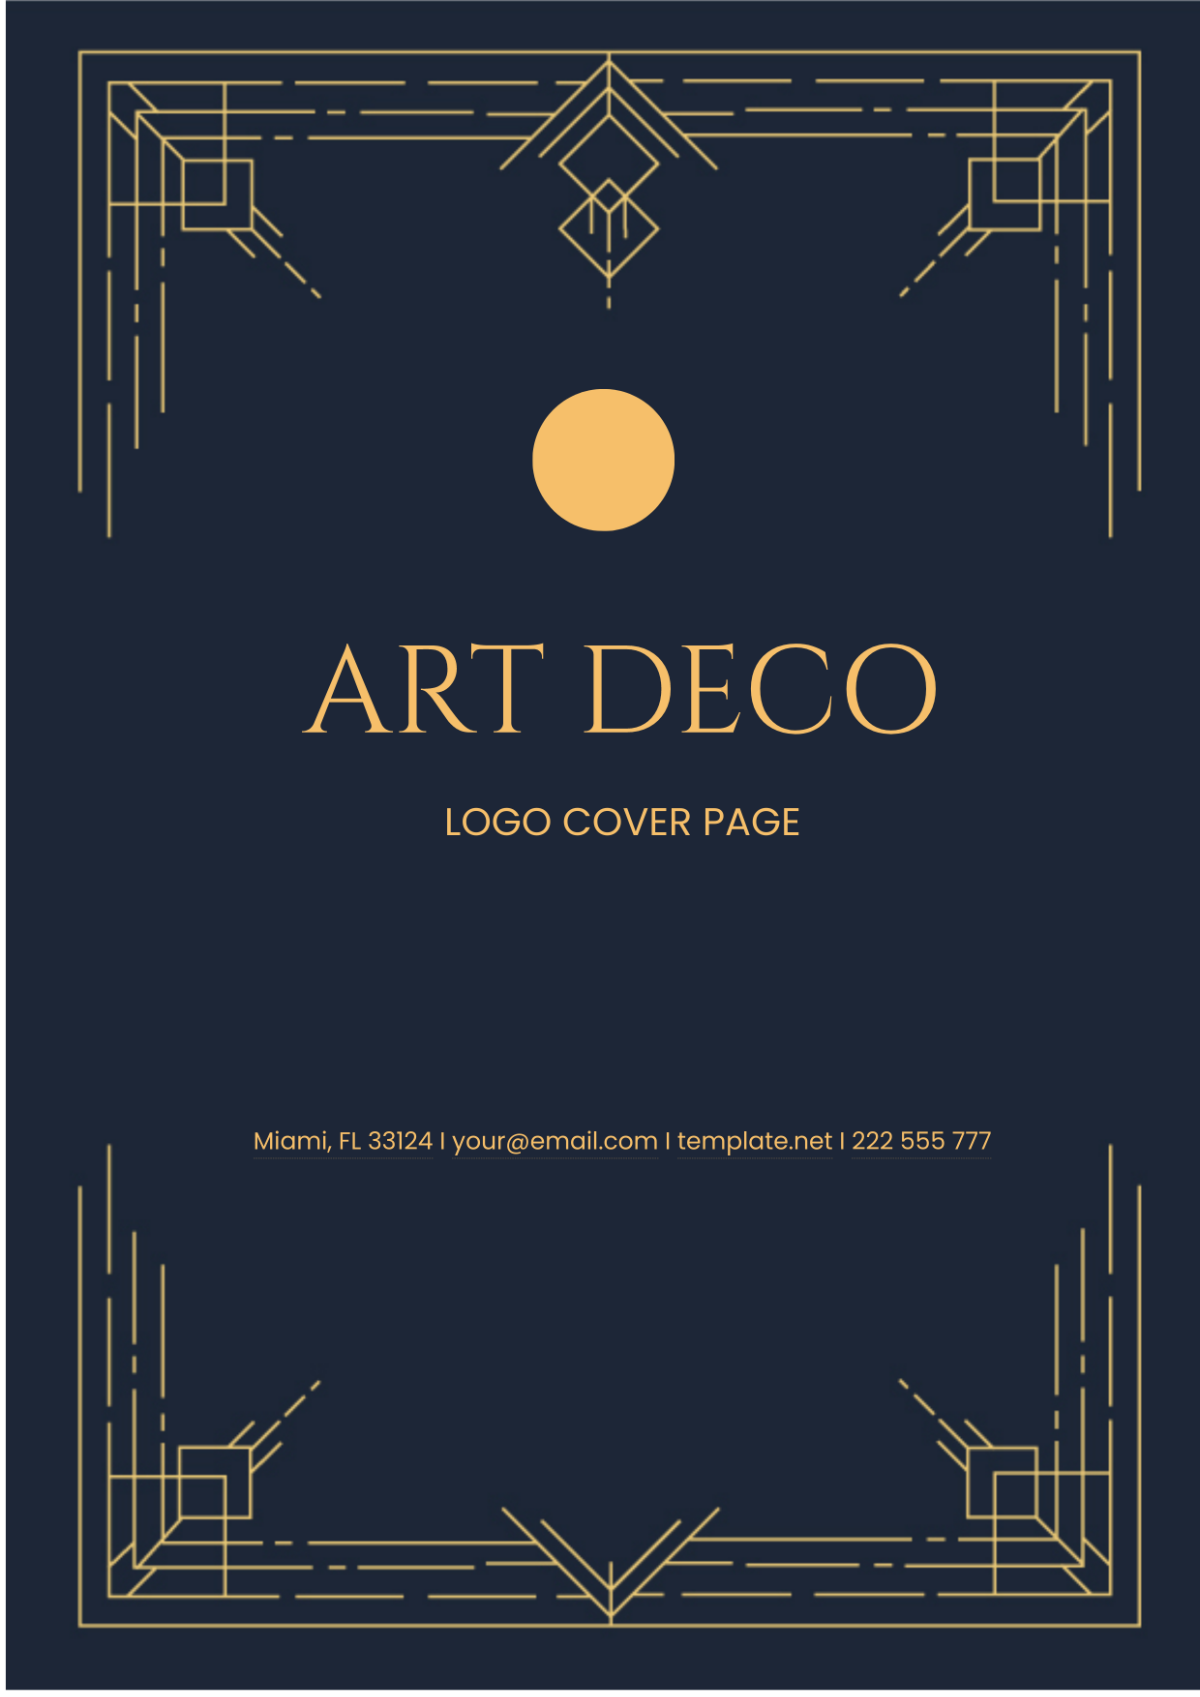 Art Deco Logo Cover Page Template